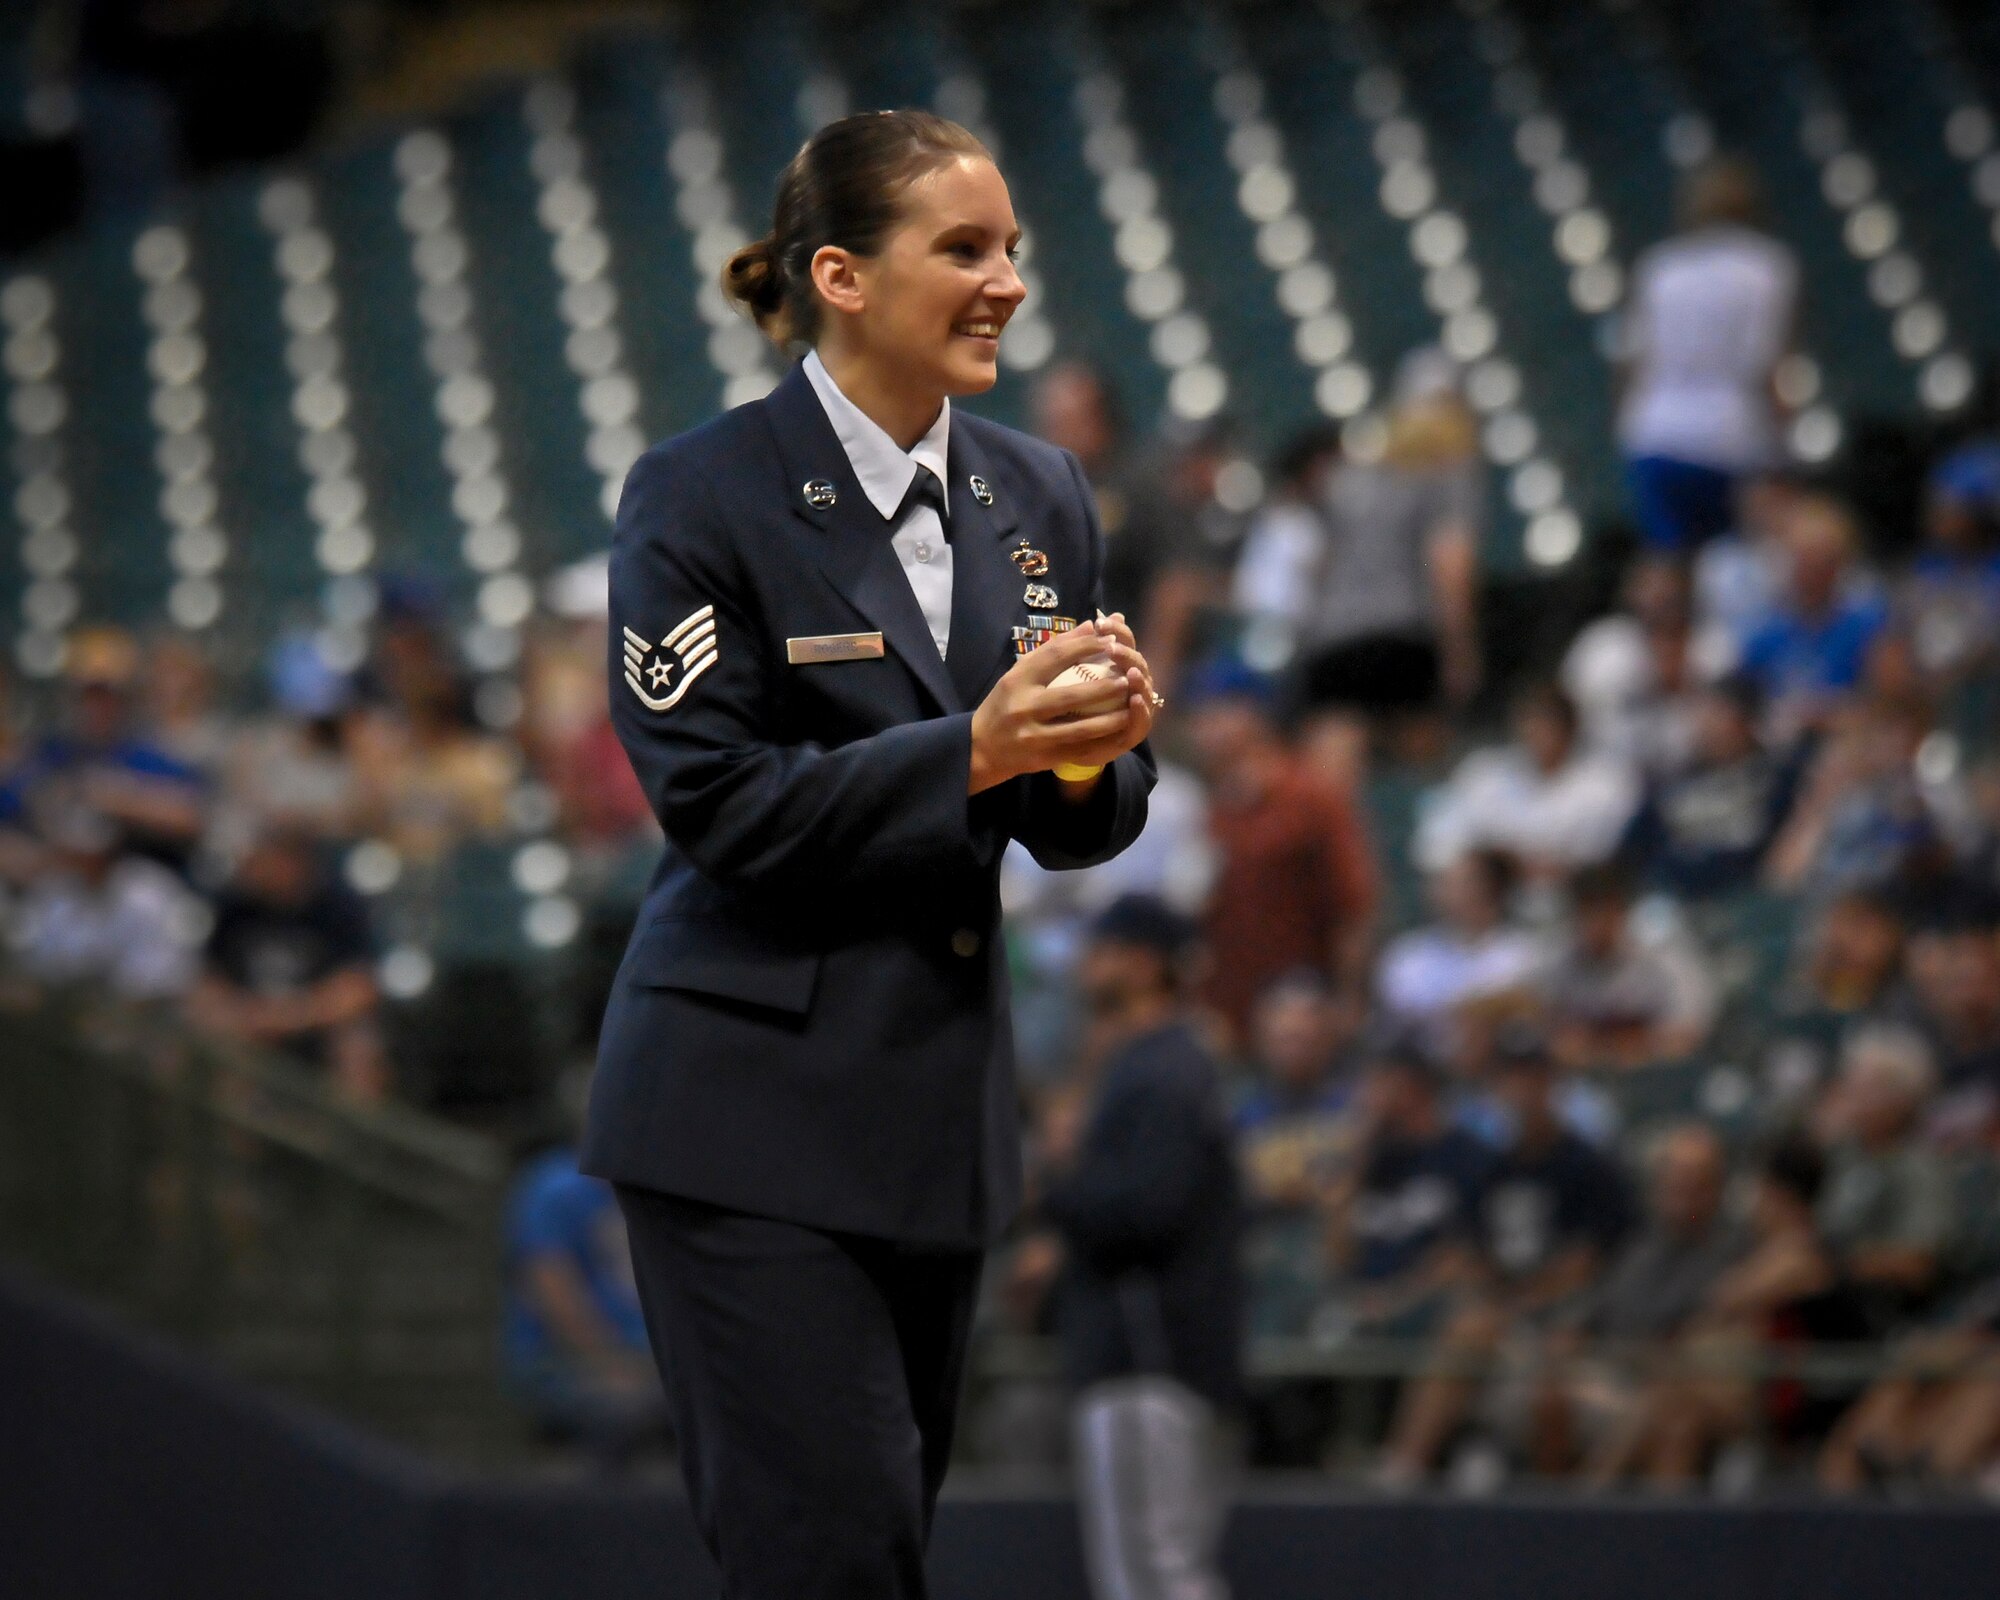 Staff Sgt. Leah Rogers readies herself to deliver the ceremonial first pitch at Miller Park in Milwaukee Wed., Sept. 12, 2012. 
Rogers, a Financial Management Specialist at the 128th Air Refueling Wing, recently returned home from an overseas deployment and was selected to represent her Air National Guard unit by throwing the ceremonial first pitch prior to the Brewers’ game against the Atlanta Braves. (Air National Guard Photo by 2nd Lt. Nathan Wallin / Released)
